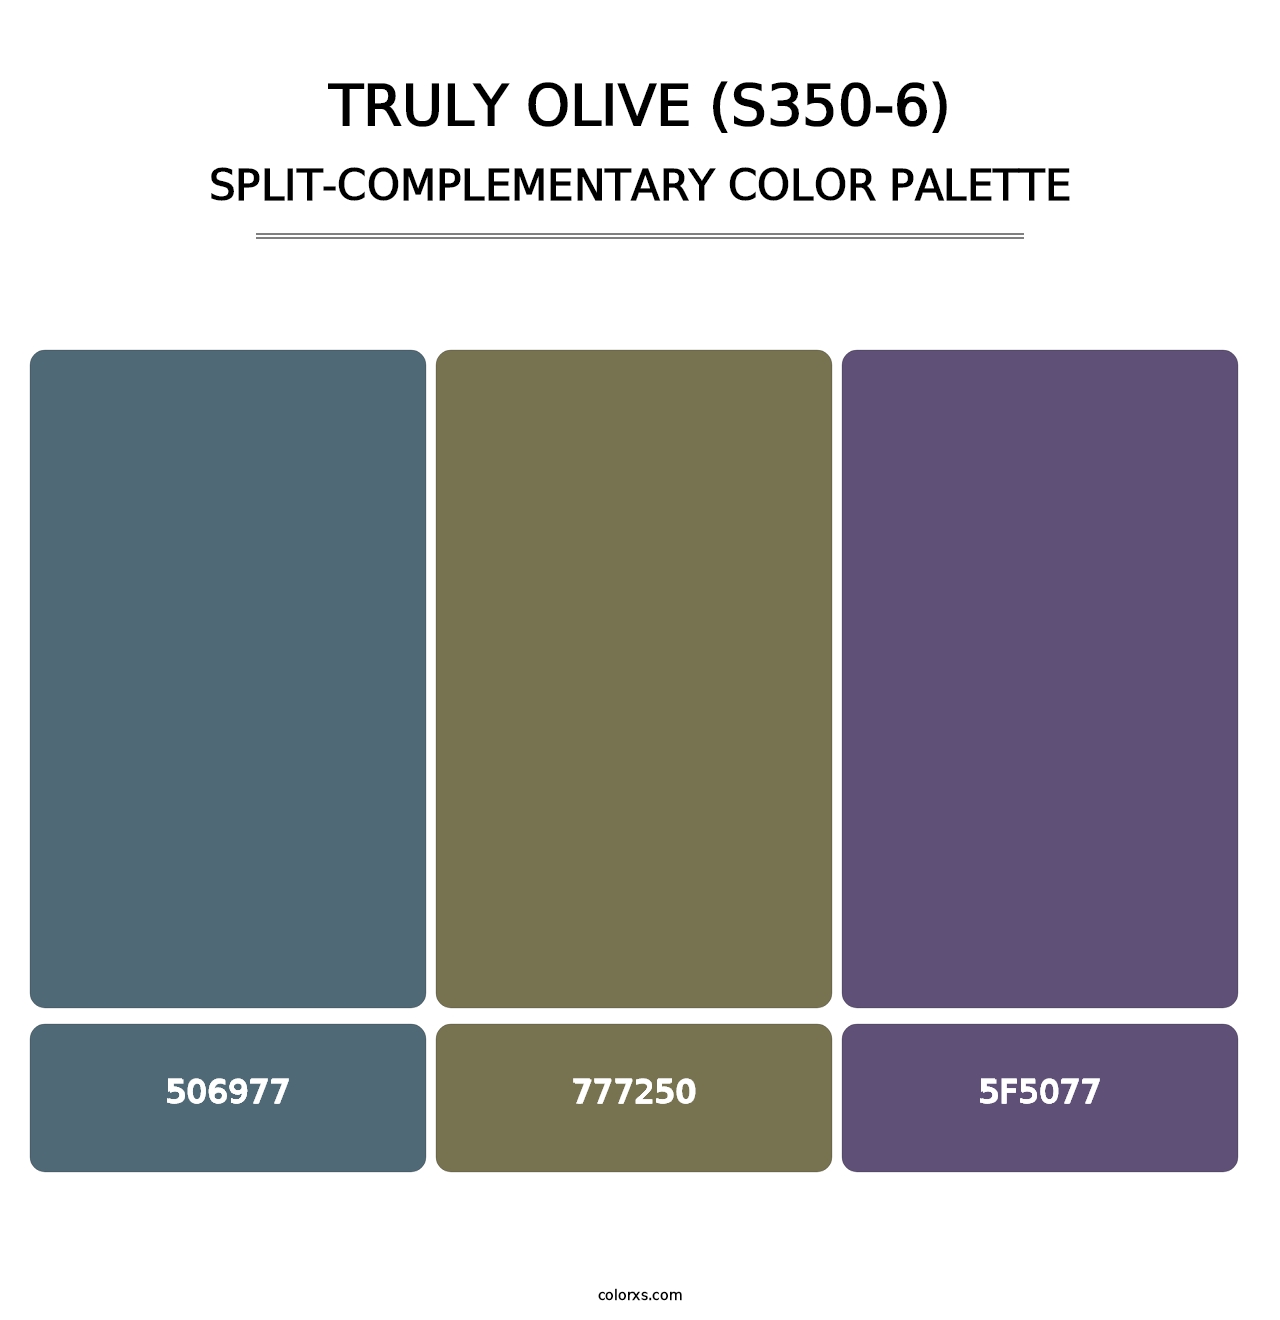 Truly Olive (S350-6) - Split-Complementary Color Palette